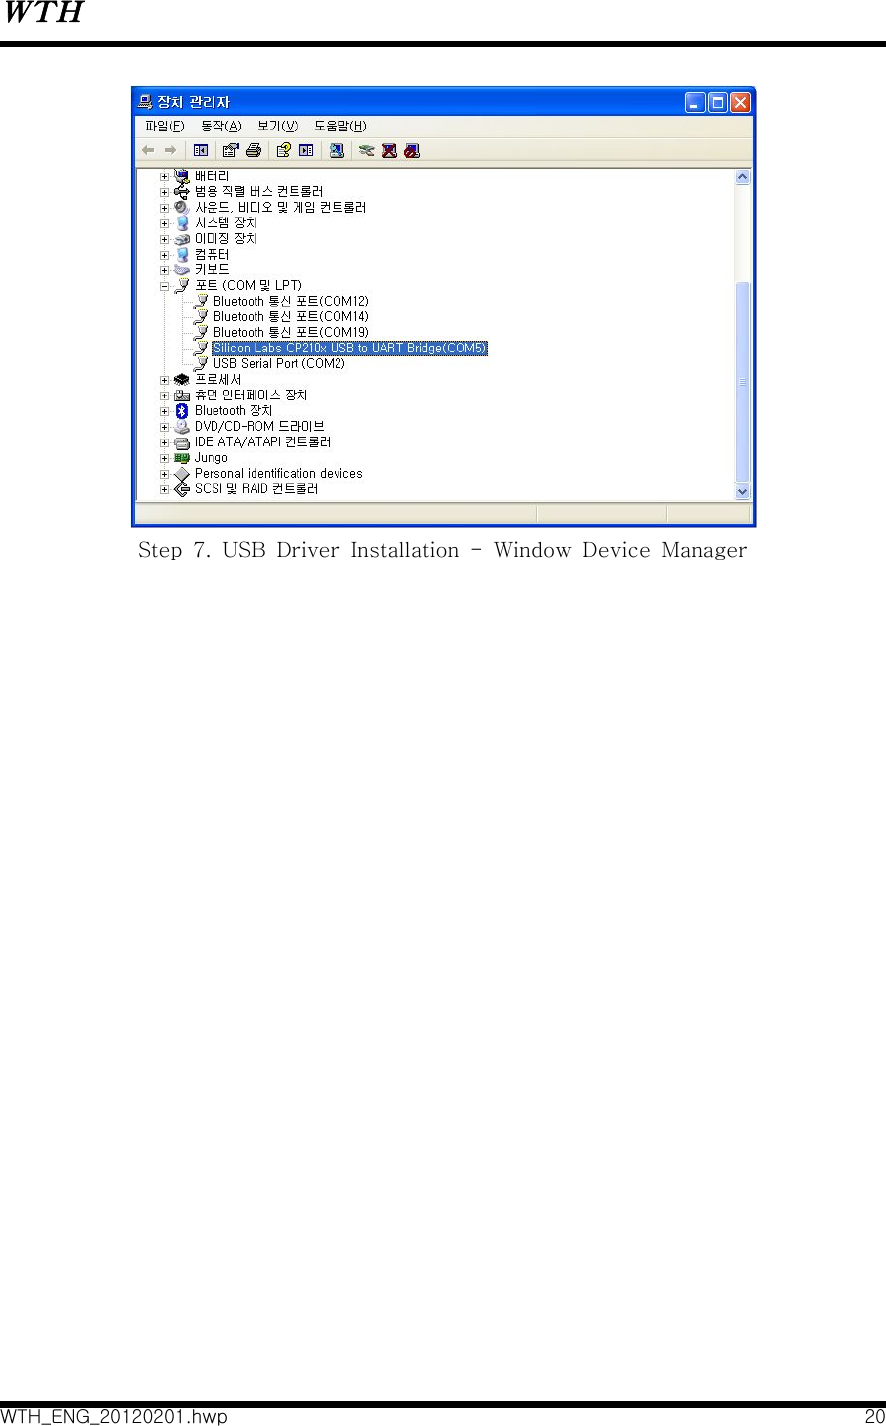 WTHWTH_ENG_20120201.hwp 20Step  7.  USB  Driver  Installation  -  Window  Device  Manager